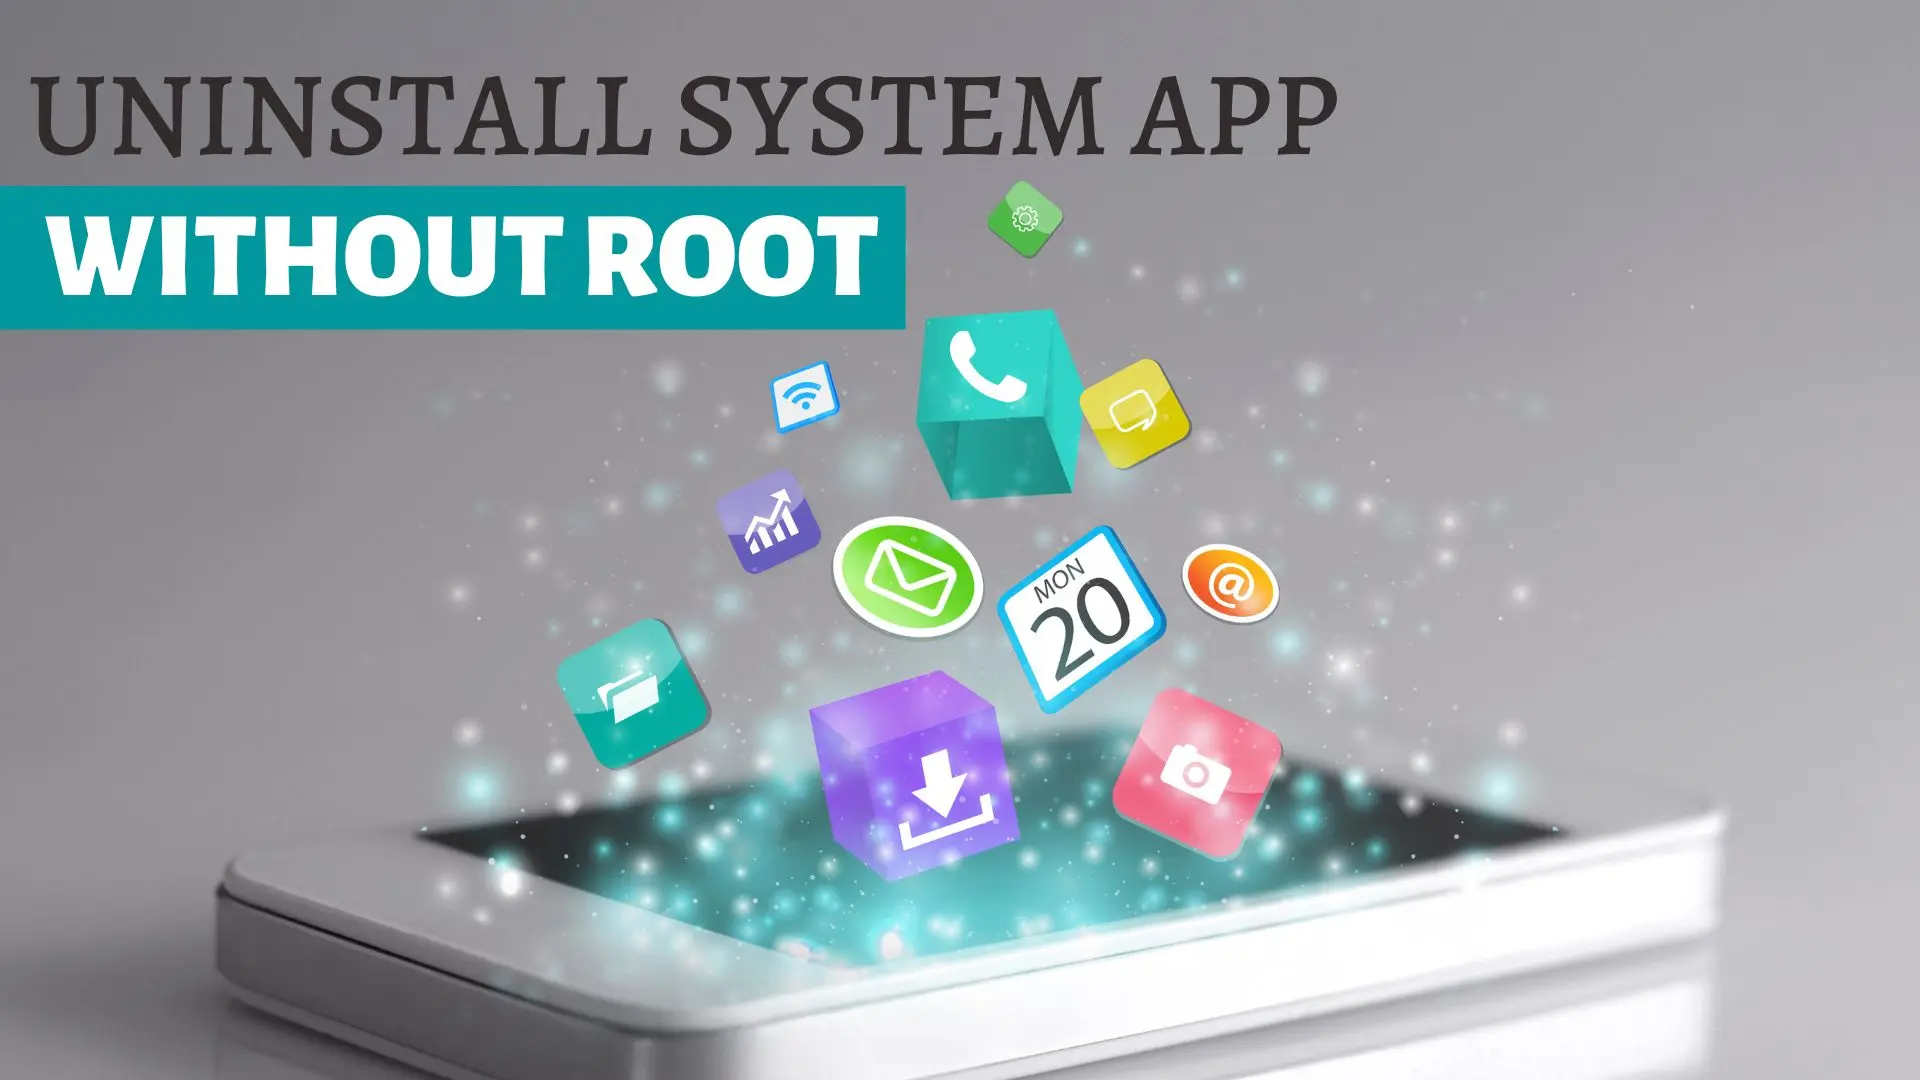 Uninstall System App without Root Android Device